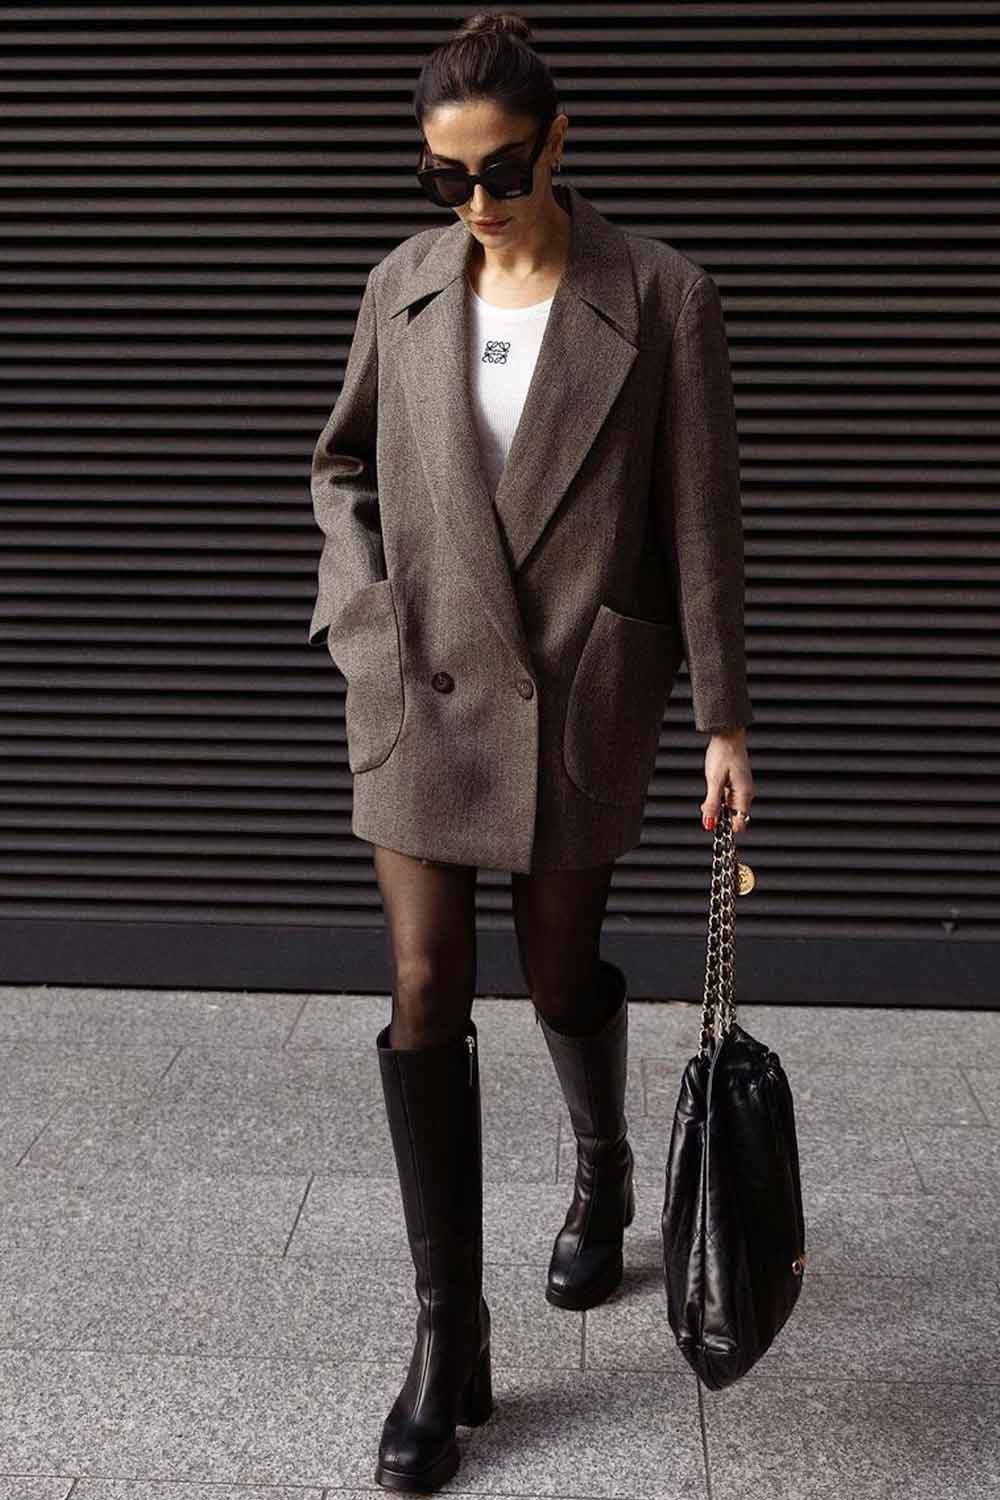 Oversize Blazer with High Boots